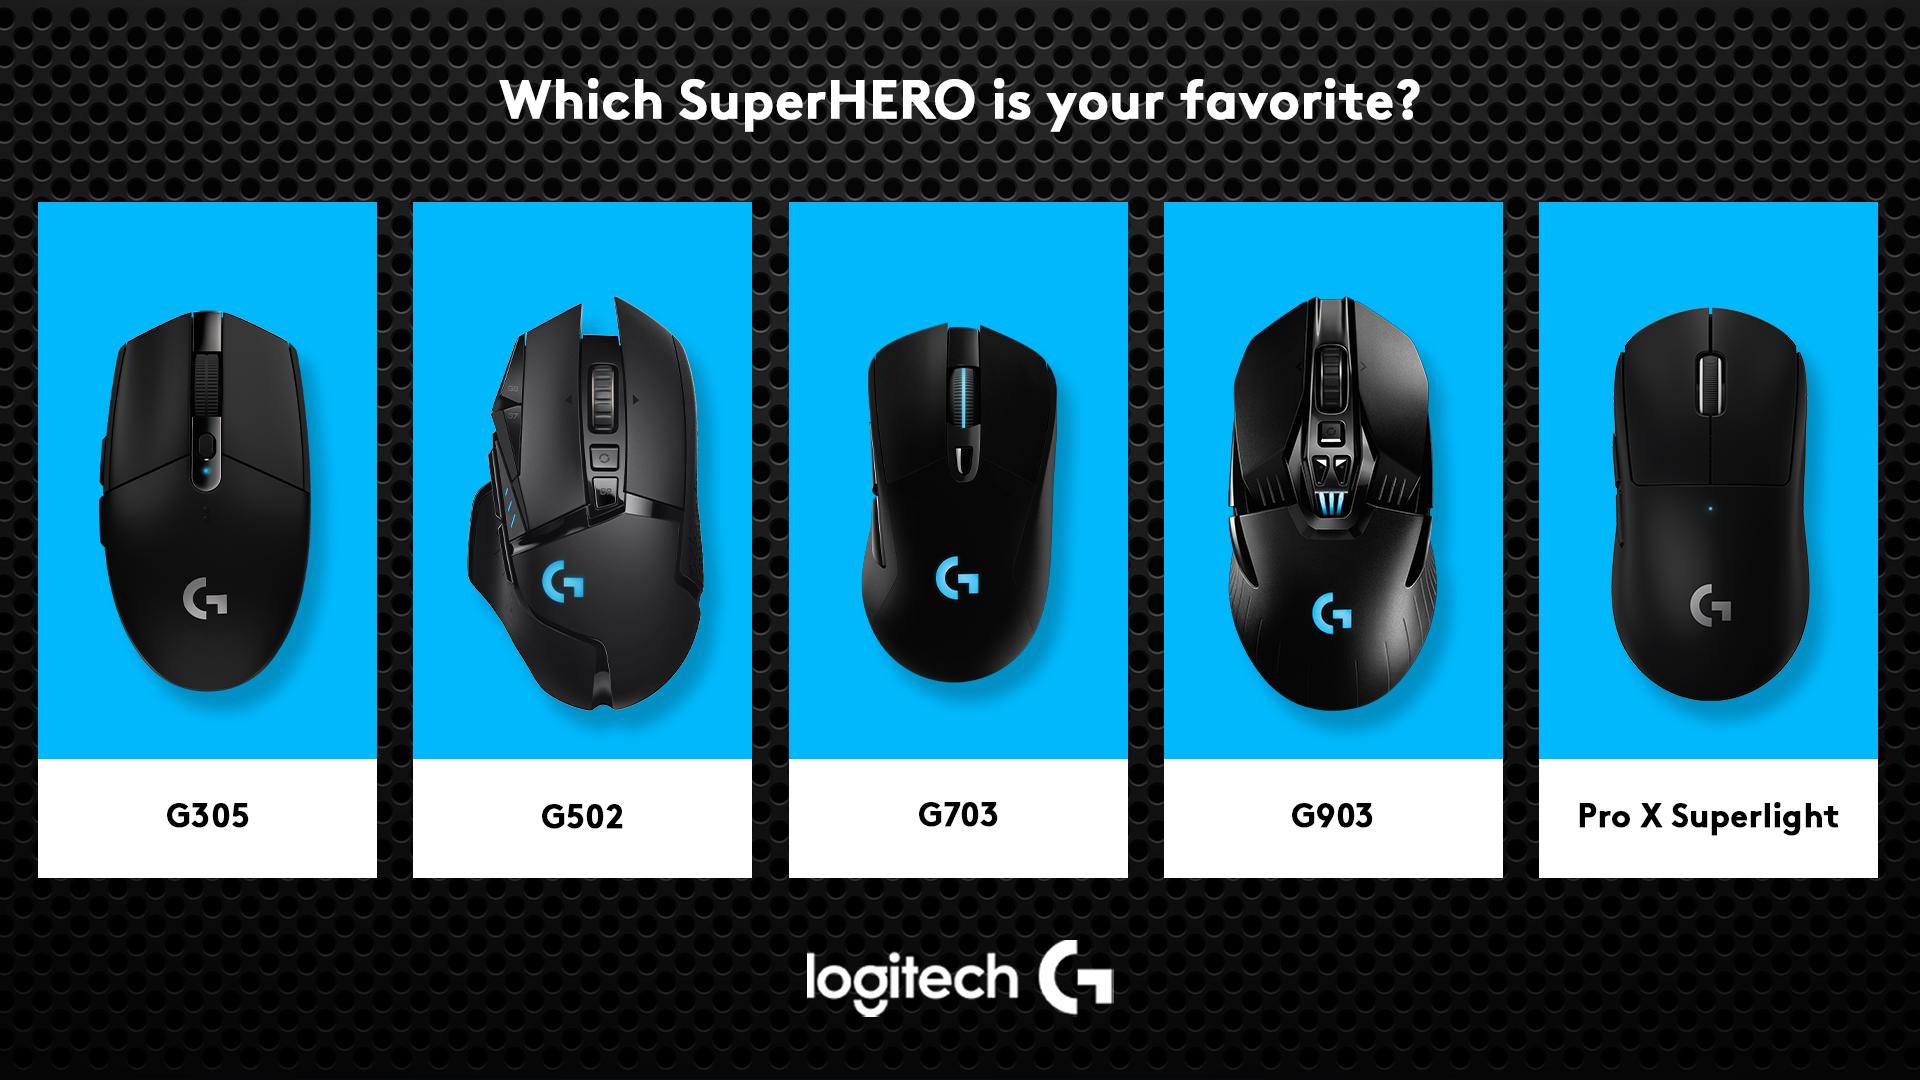 Logitech G on Twitter: "Happy National SuperHERO Day! Which which one of  these wireless HERO sensored mice are you running for your setup?  https://t.co/ppmB7viLcf" / Twitter